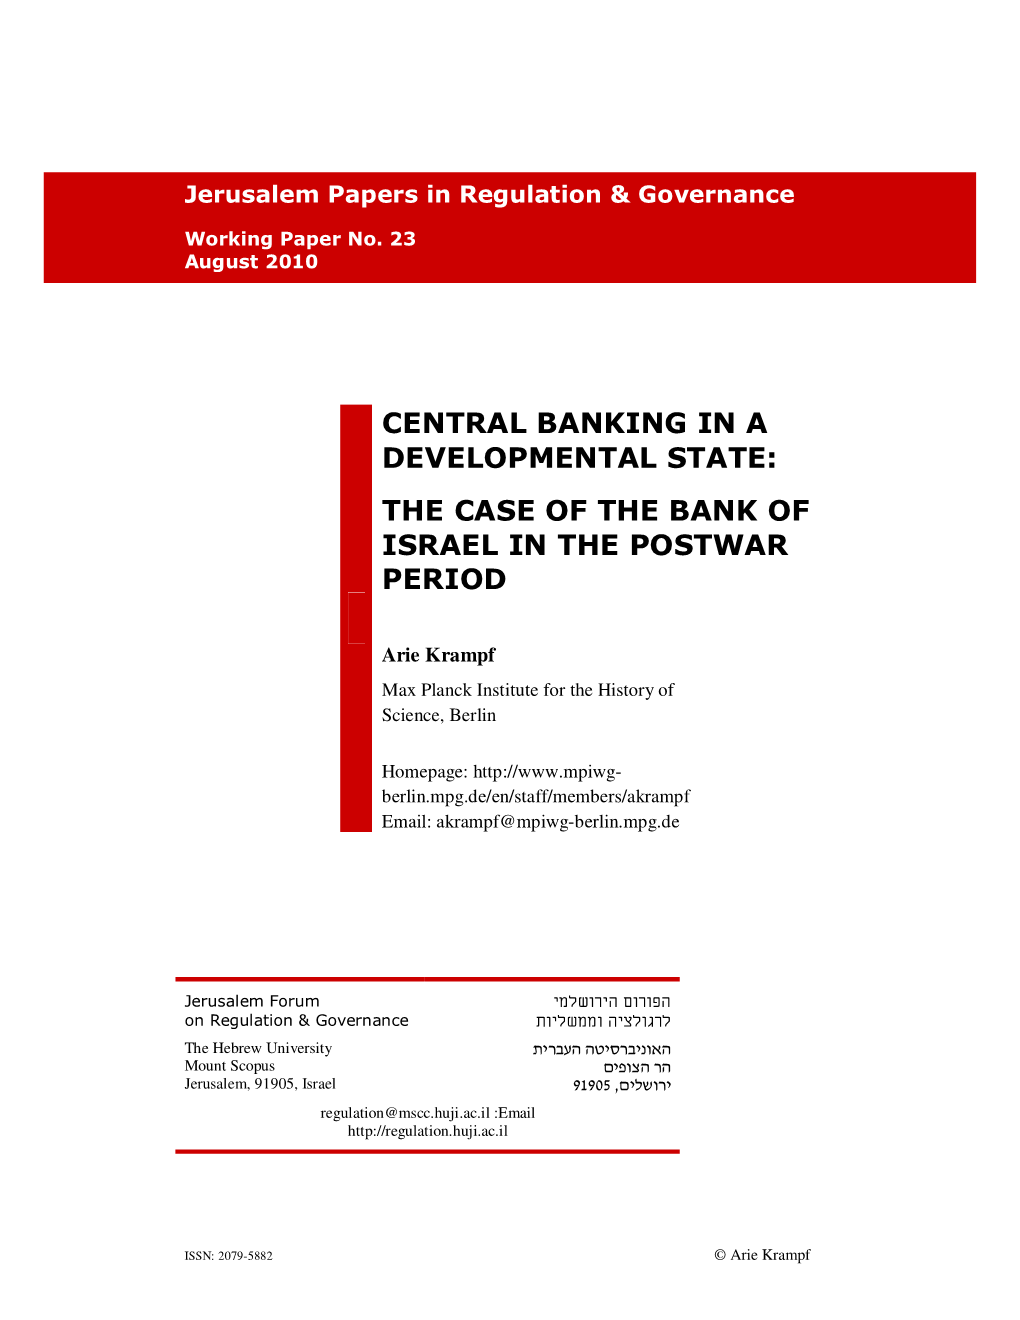 Central Banking in a Developmental State: the Case of the Bank of Israel in the Postwar Period